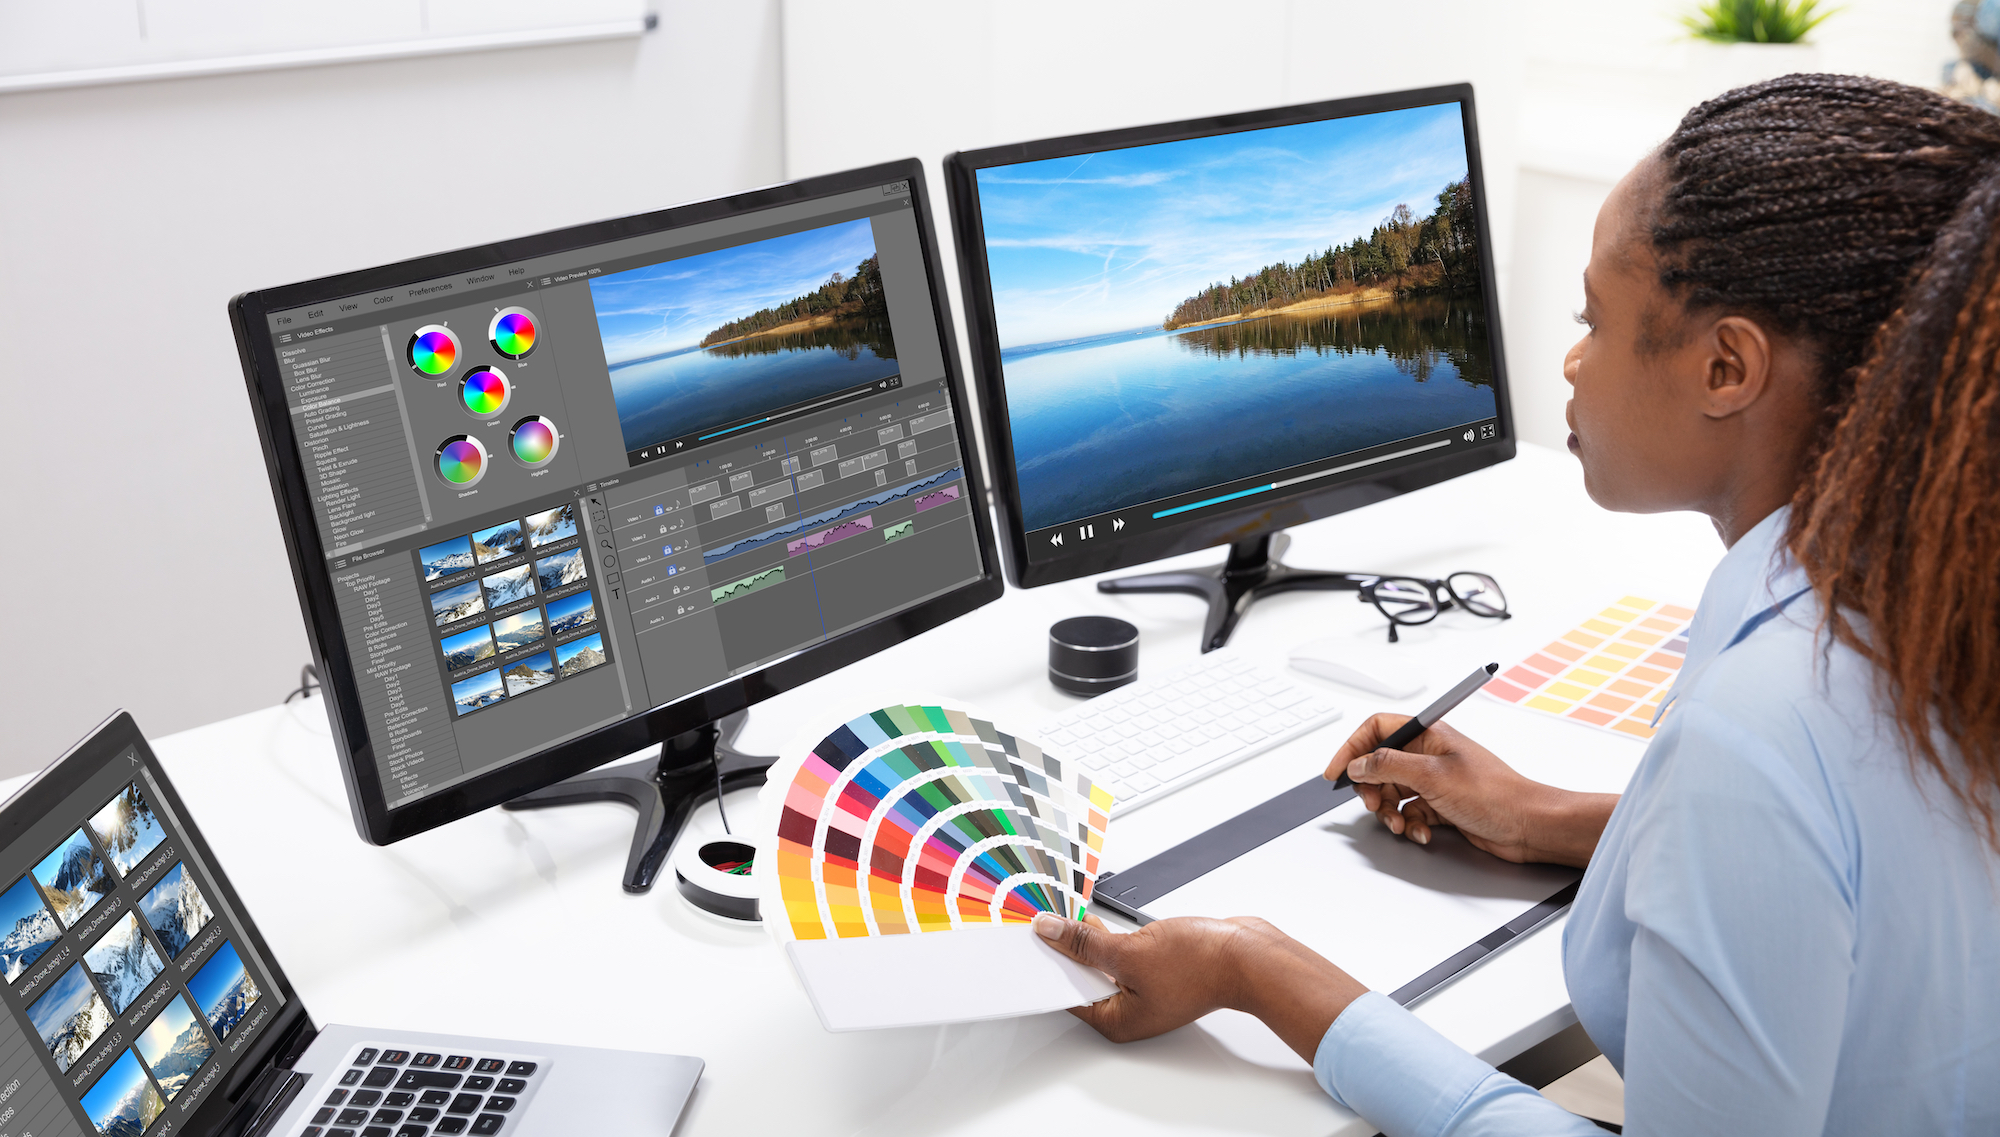 5 Tips to Choose the Best Video Editing Software for Windows